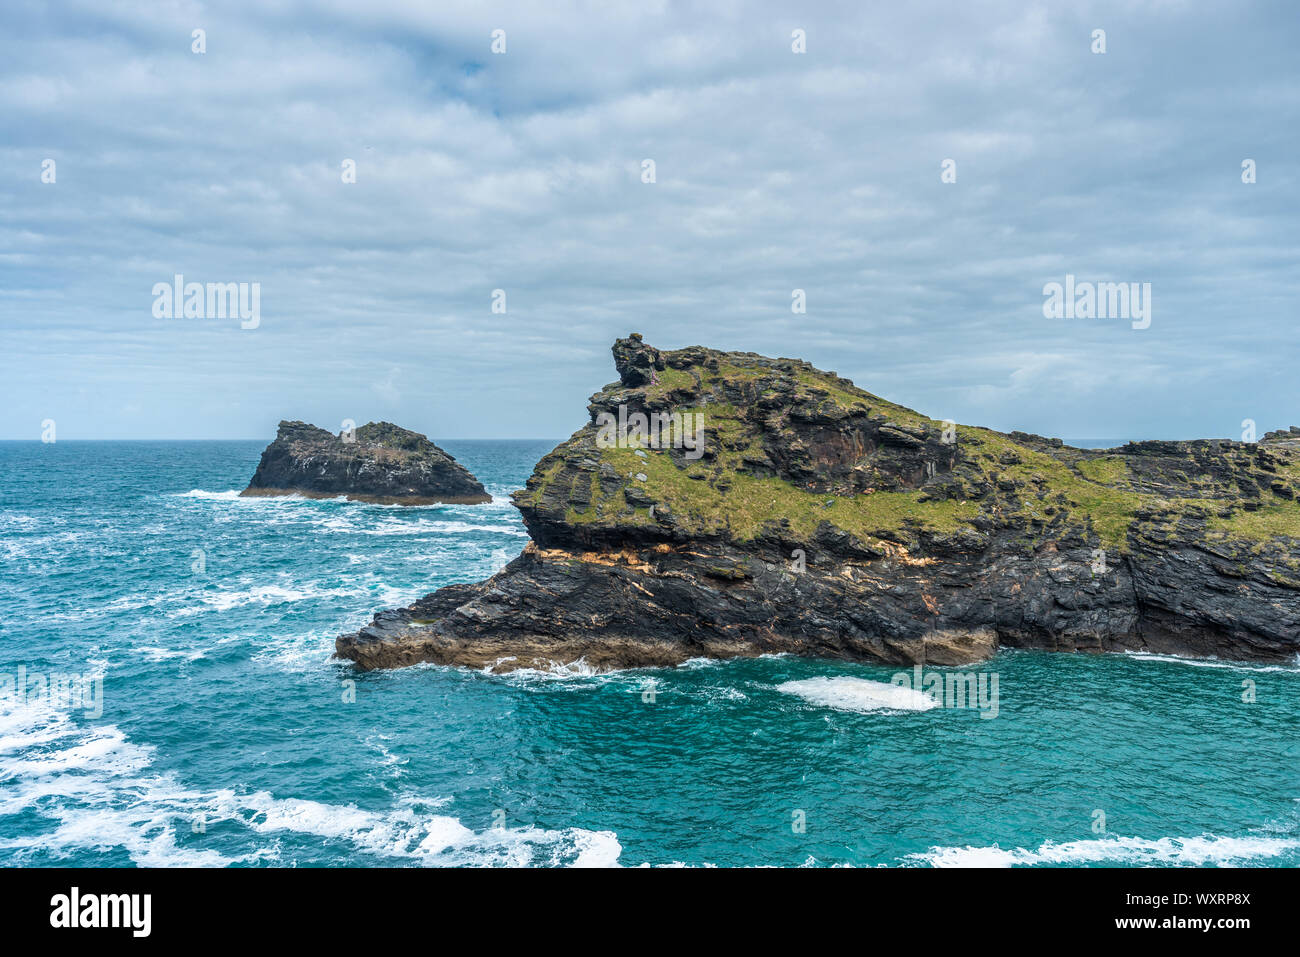 Warren point at the entrance of Boscastle Harbour in North Cornwall, England, UK. Stock Photo